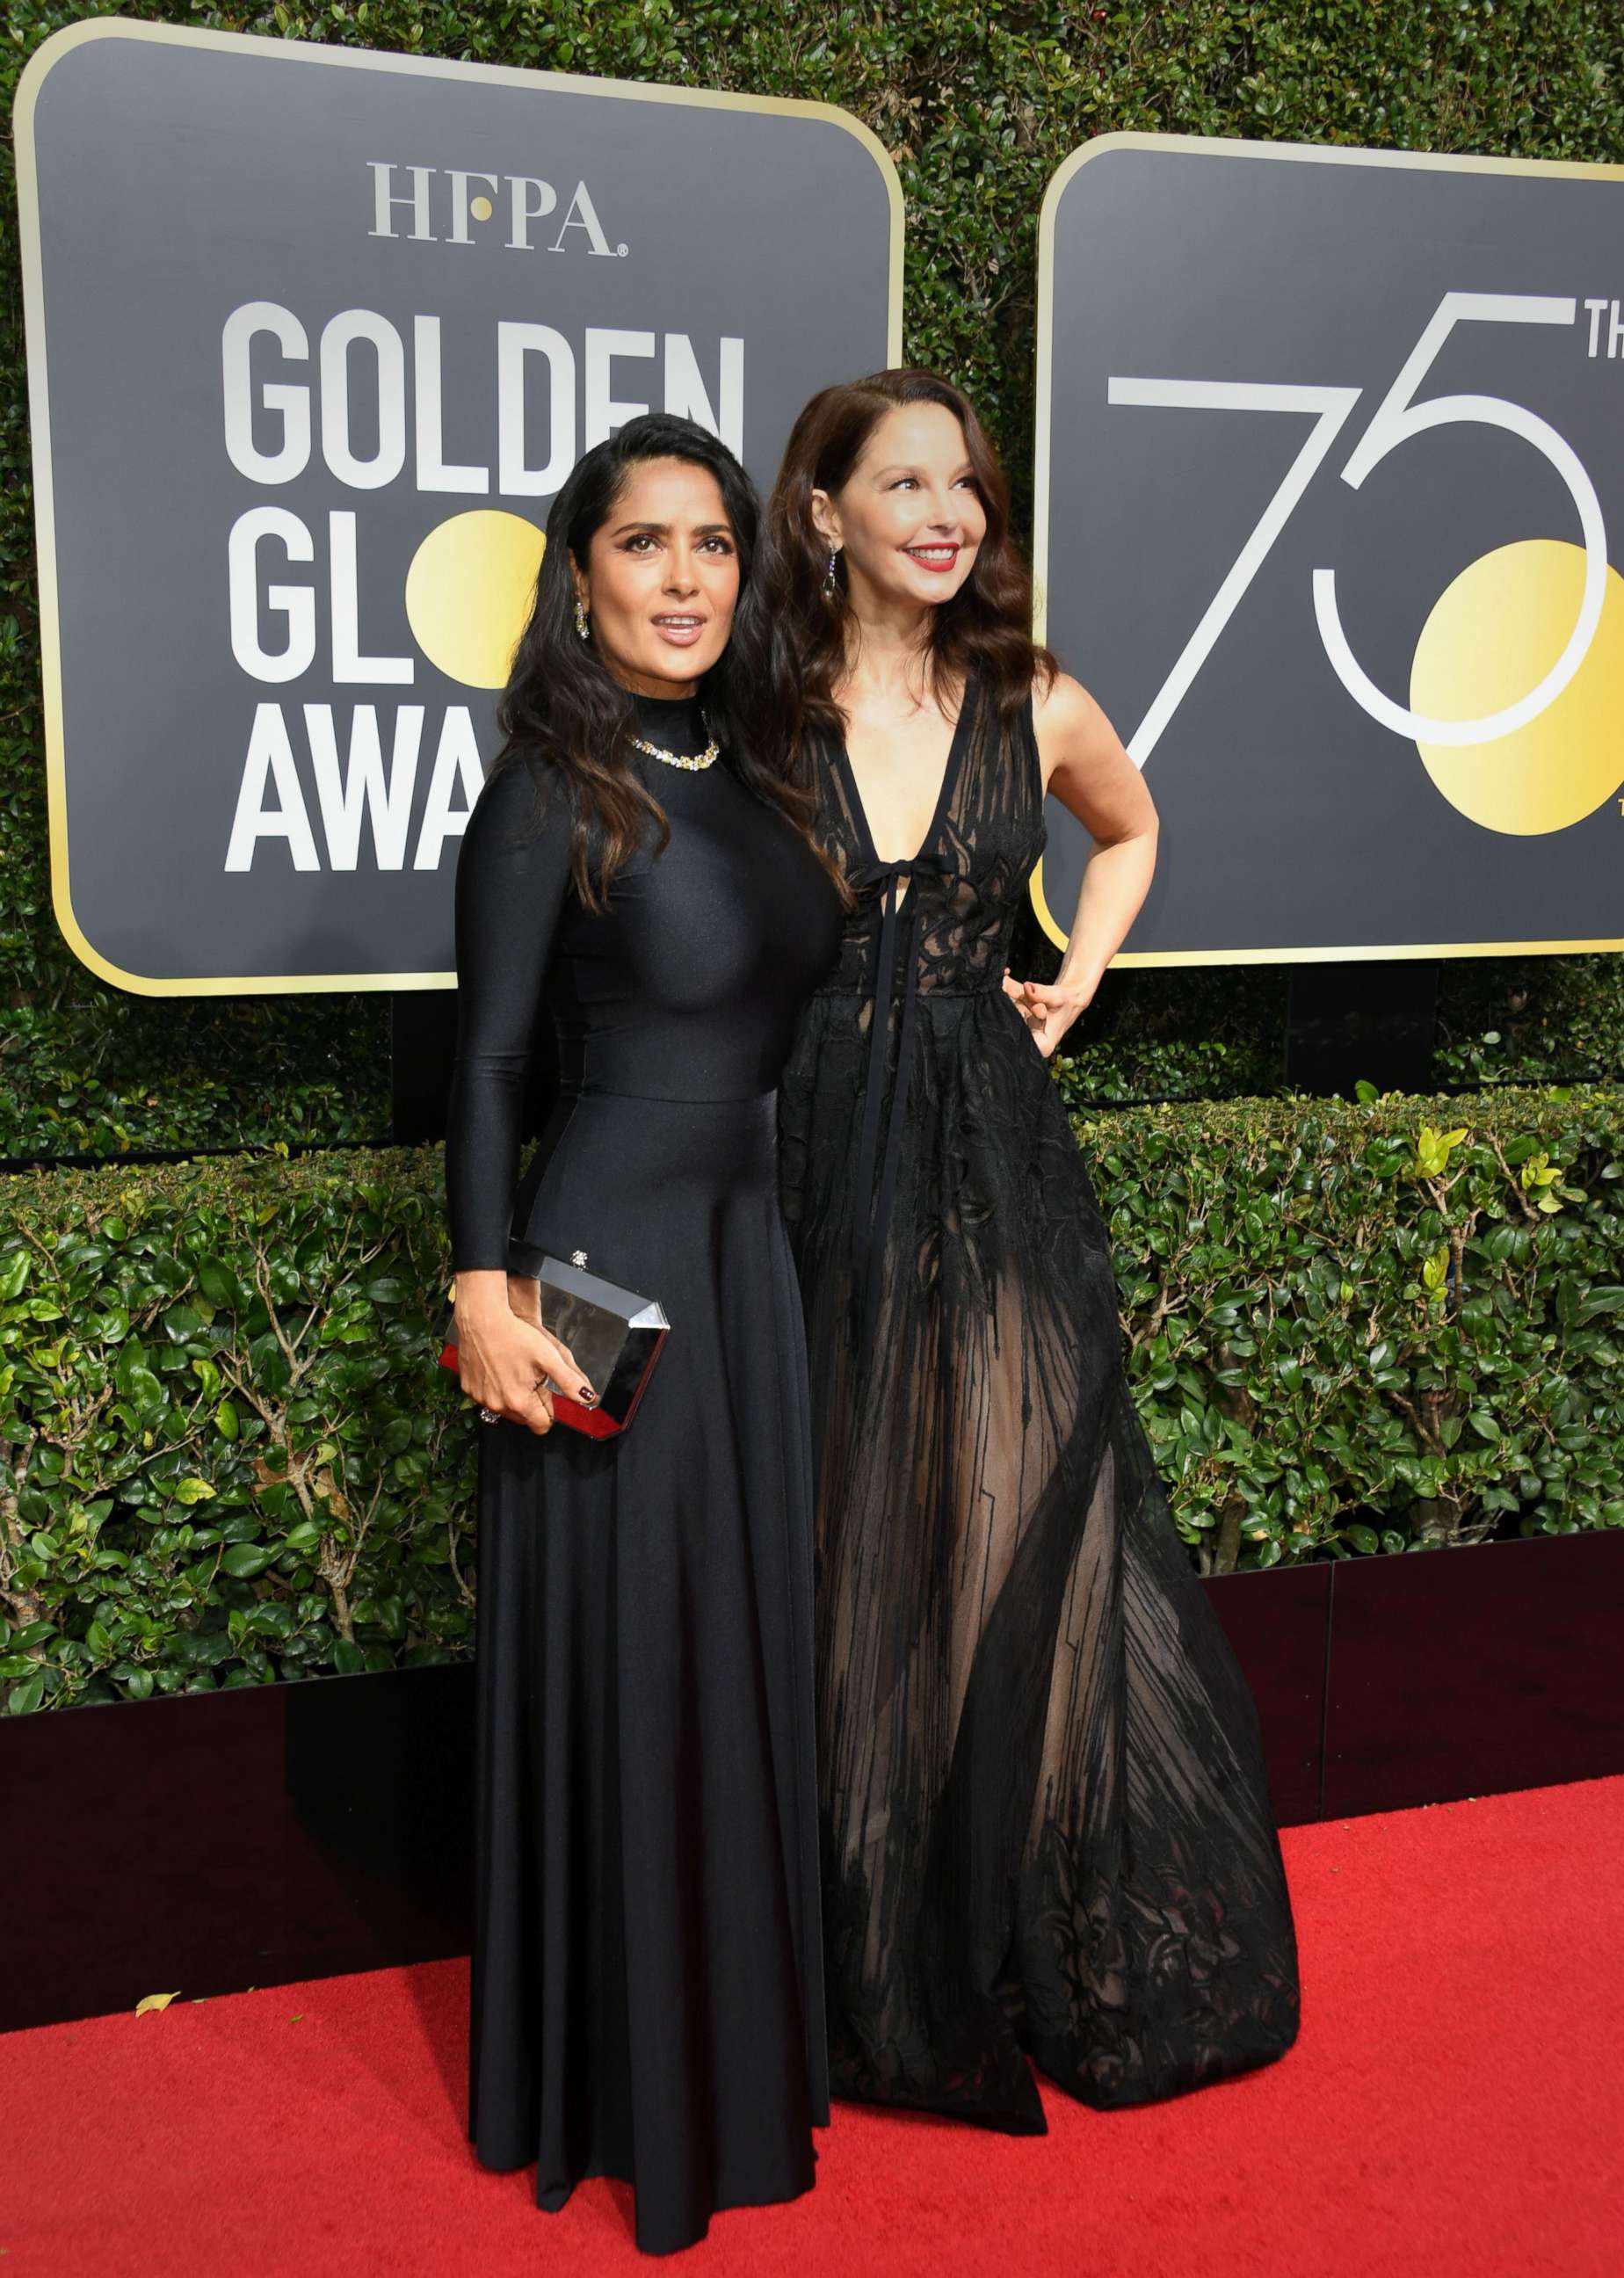 PHOTO: Salma Hayek and Ashley Judd arrive for the 75th Golden Globe Awards on Jan. 7, 2018, in Beverly Hills, Calif.